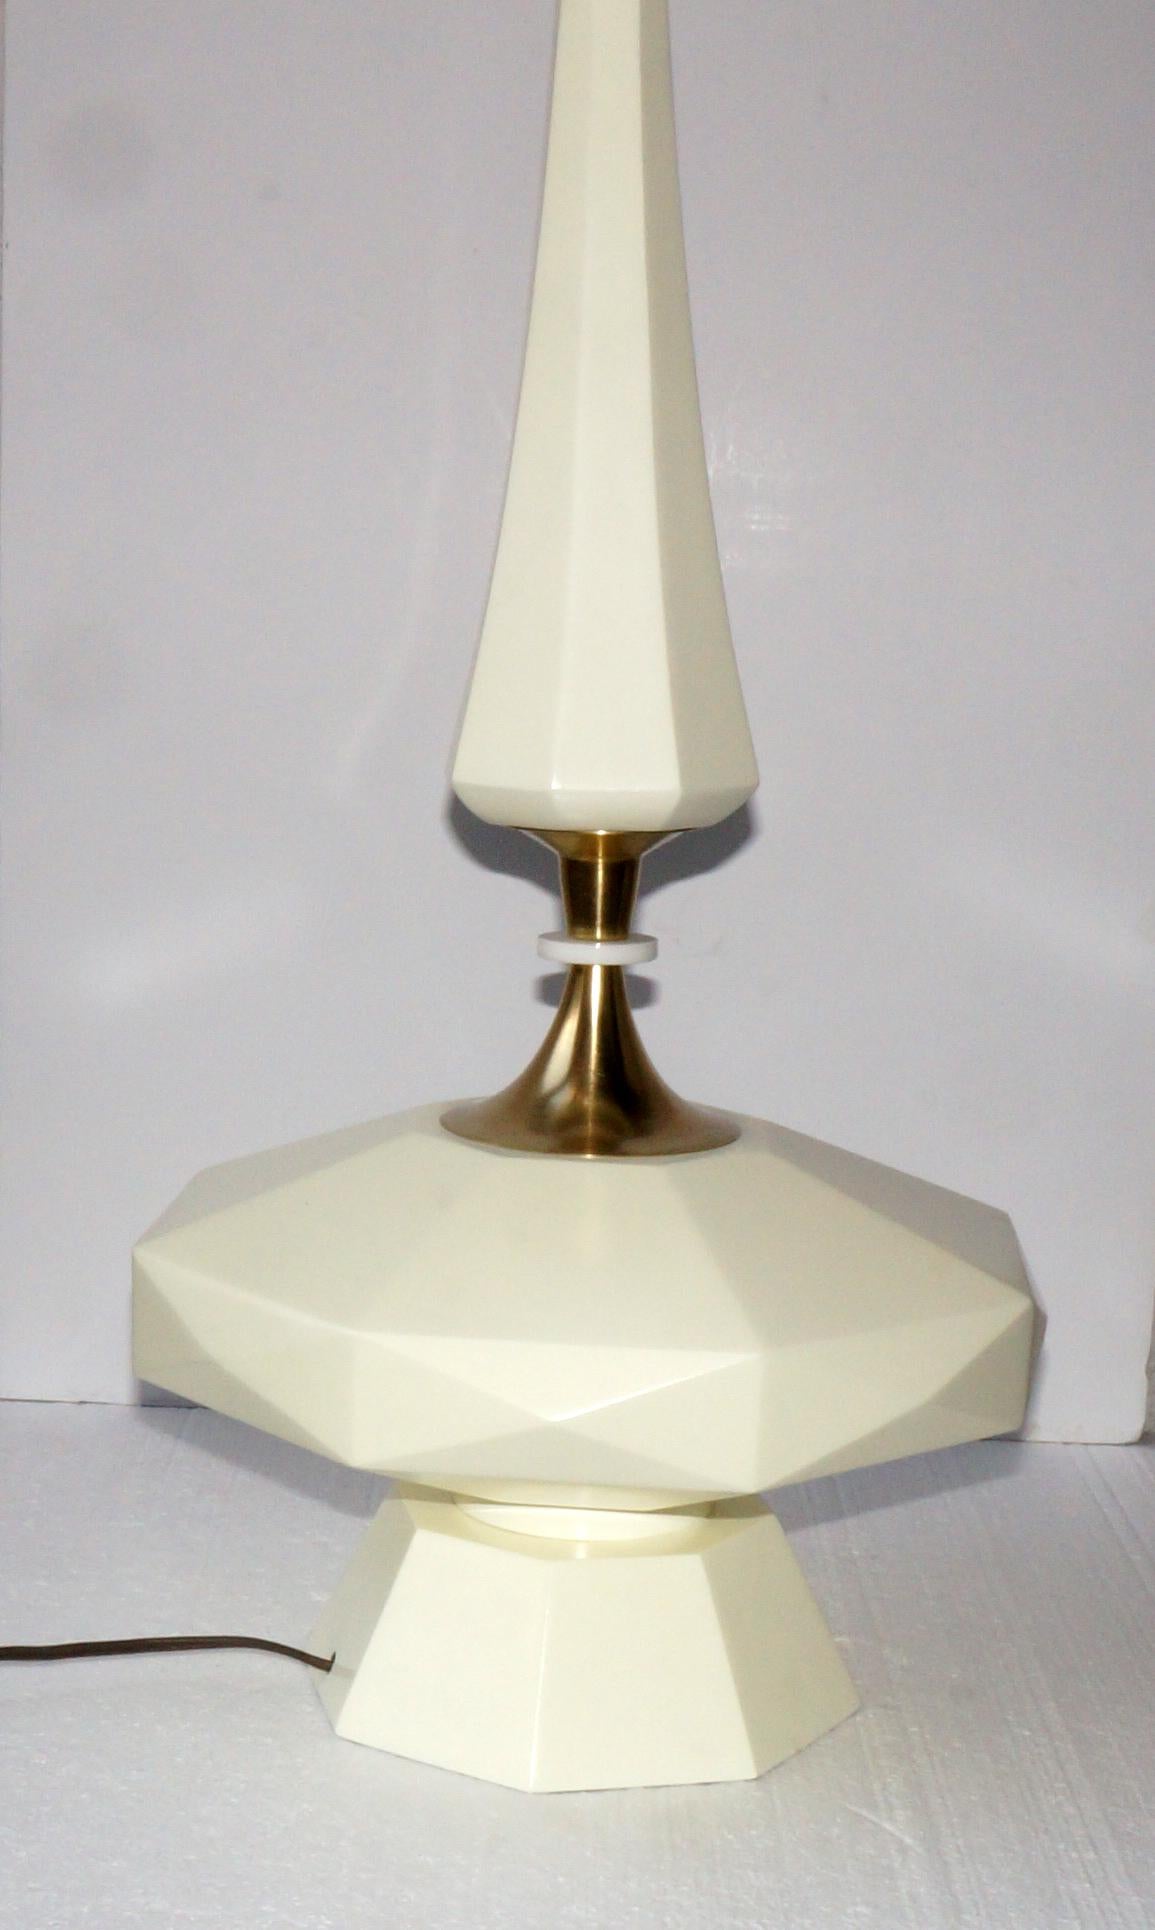 Set of 2 pieces. Lamps created circa 1950, in lacquered wood and bronze applications, the lampshades are original, fiberglass in extra-ordinary conditions. They are 2 monumental pieces.